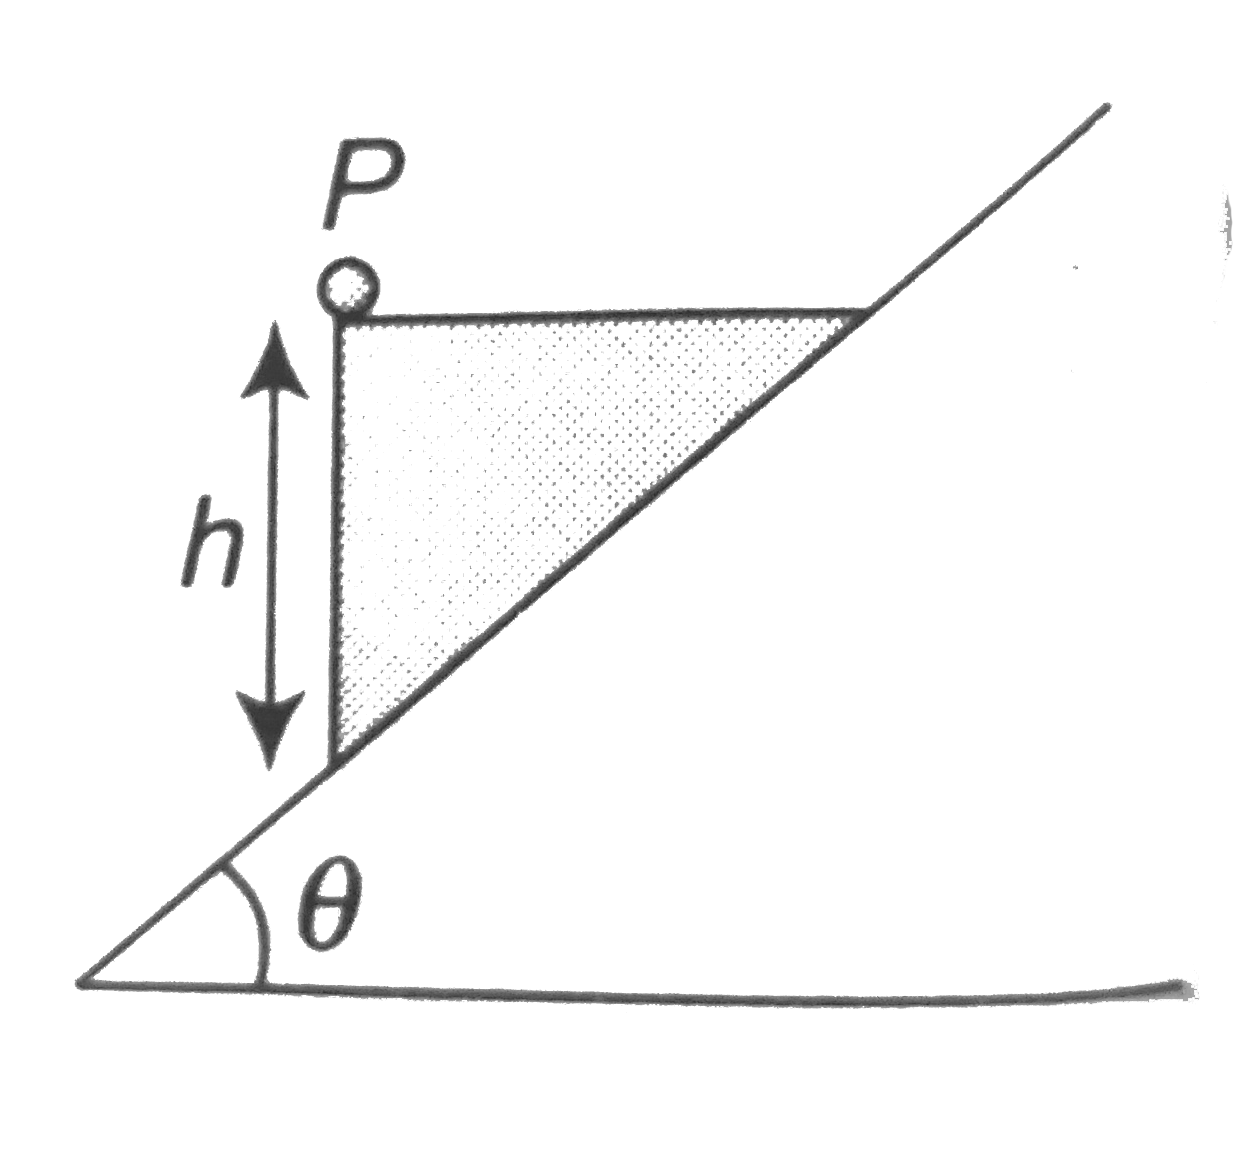 A wedge of height 'h' is released from rest with a light particle P placed on it as shown. The wedge slides down an incline which makes an angle theta with the horizontal. All the surface are smooth, P will reach the surface of the incline in time: